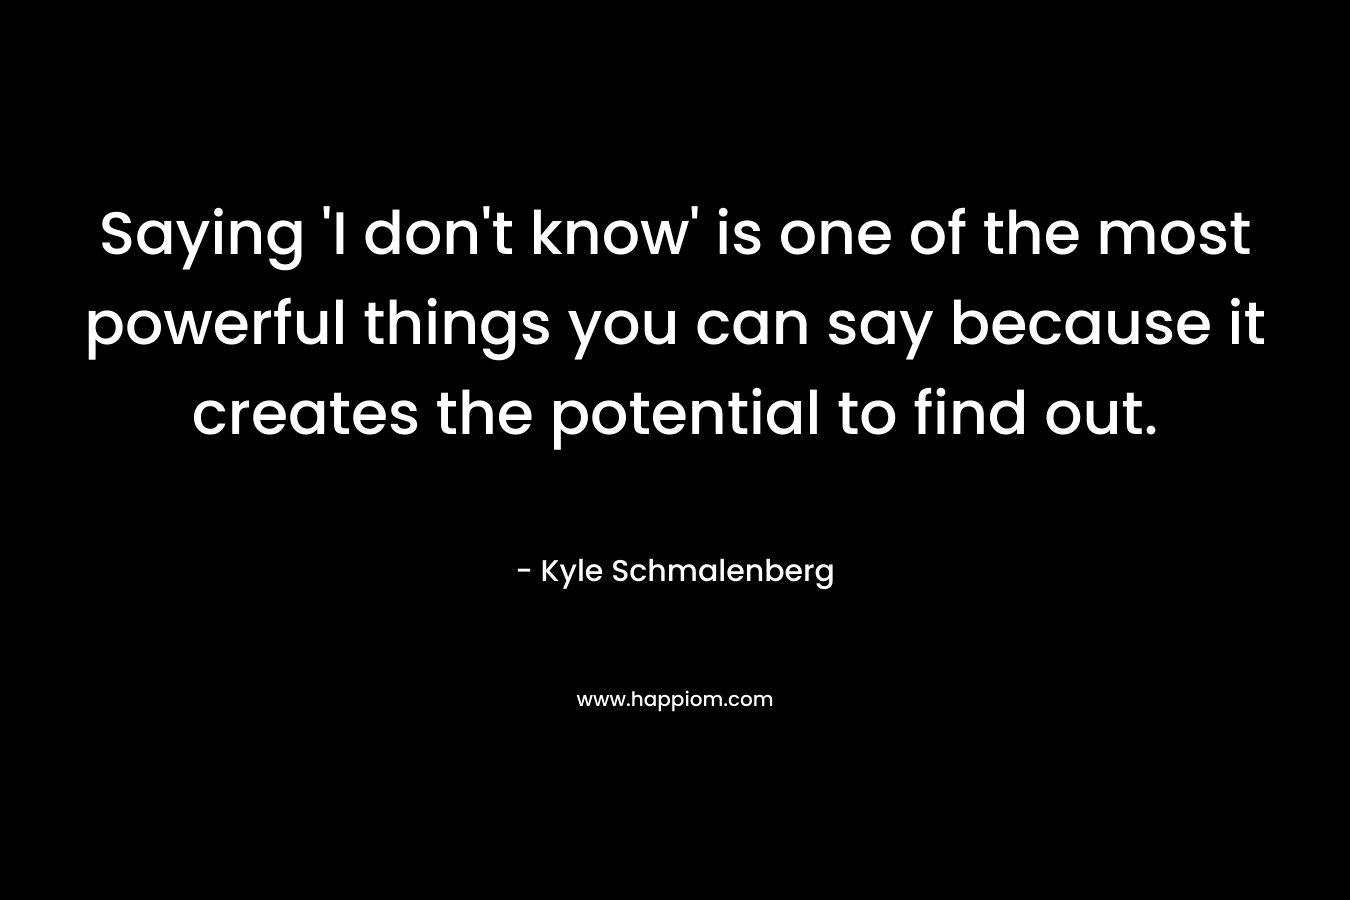 Saying ‘I don’t know’ is one of the most powerful things you can say because it creates the potential to find out. – Kyle Schmalenberg